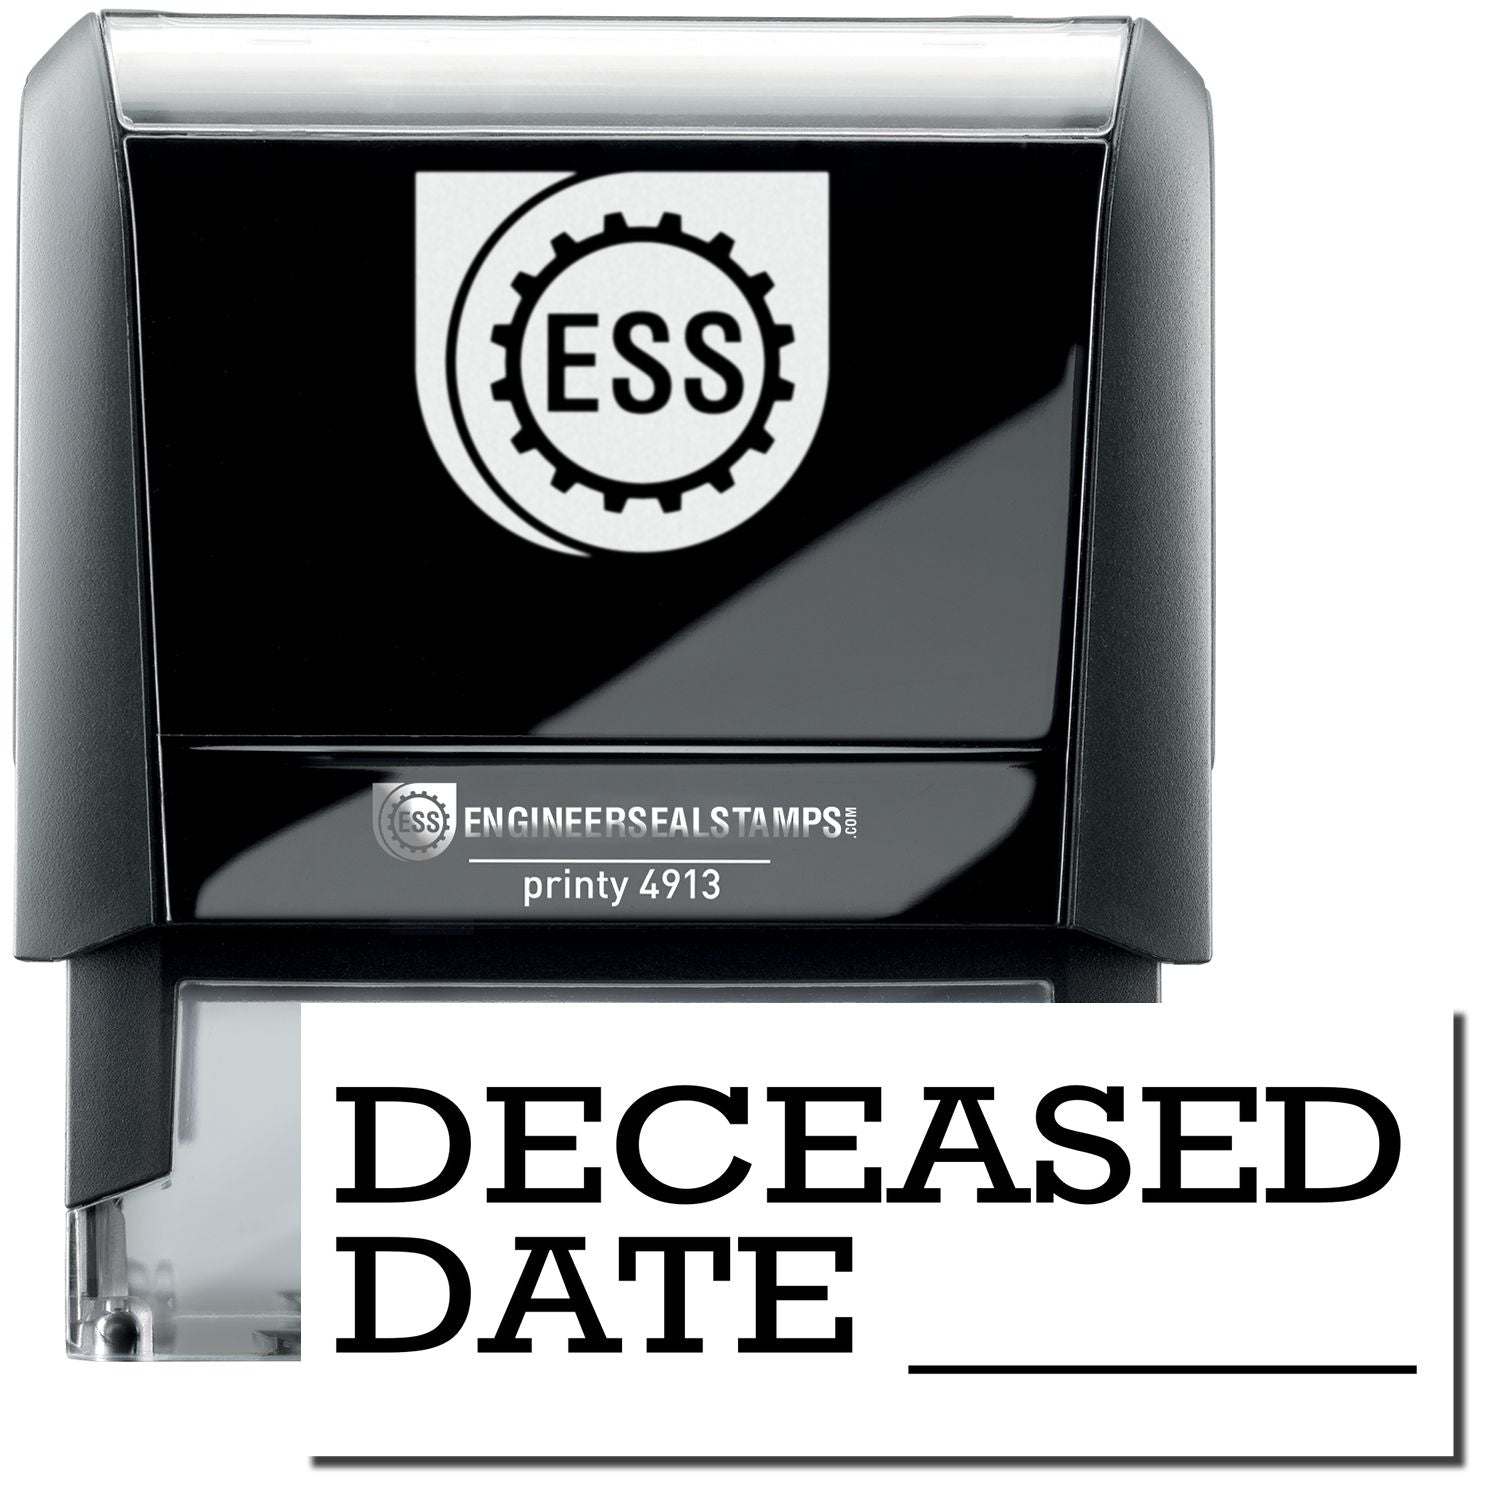 A self-inking stamp with a stamped image showing how the text "DECEASED DATE" in a large bold font is displayed by it with a dash where the date can be mentioned.